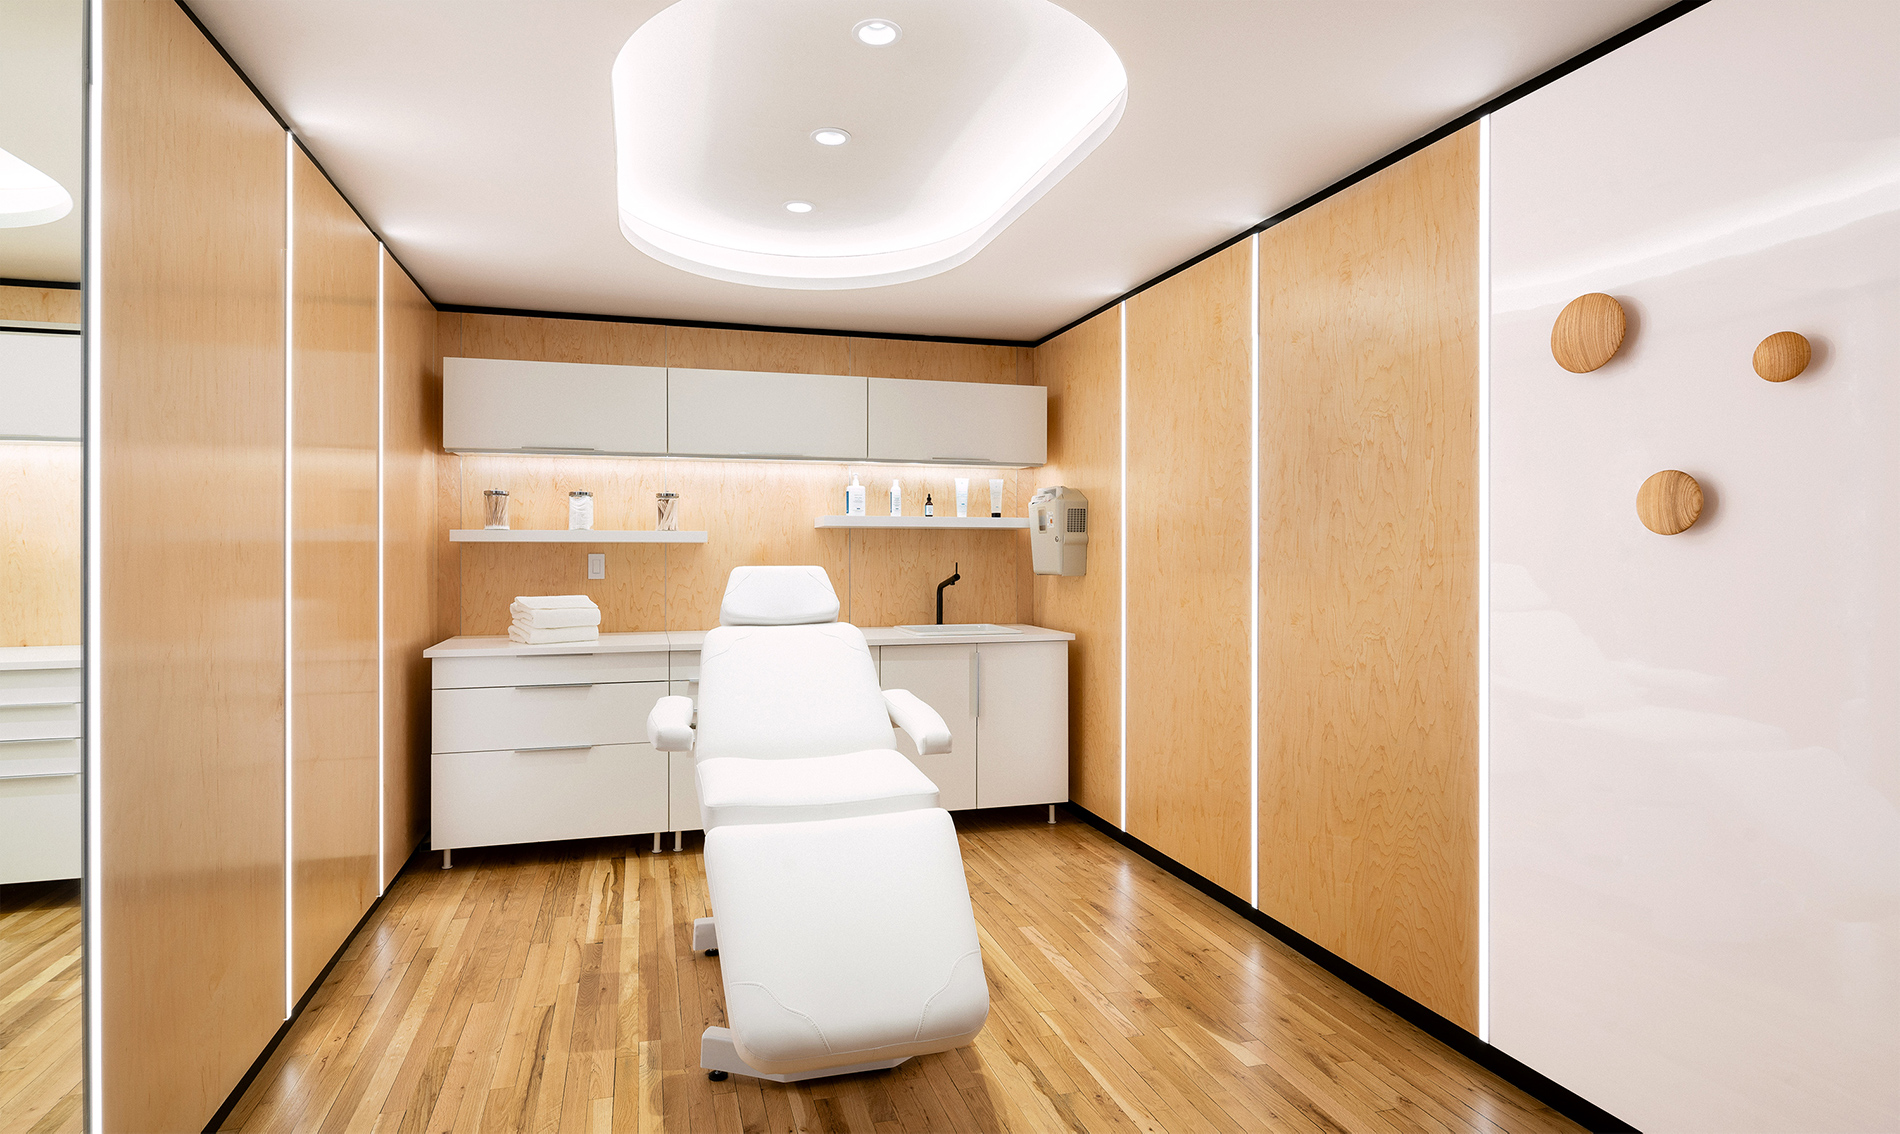 The dermatology clinic made smarter, more welcoming, and